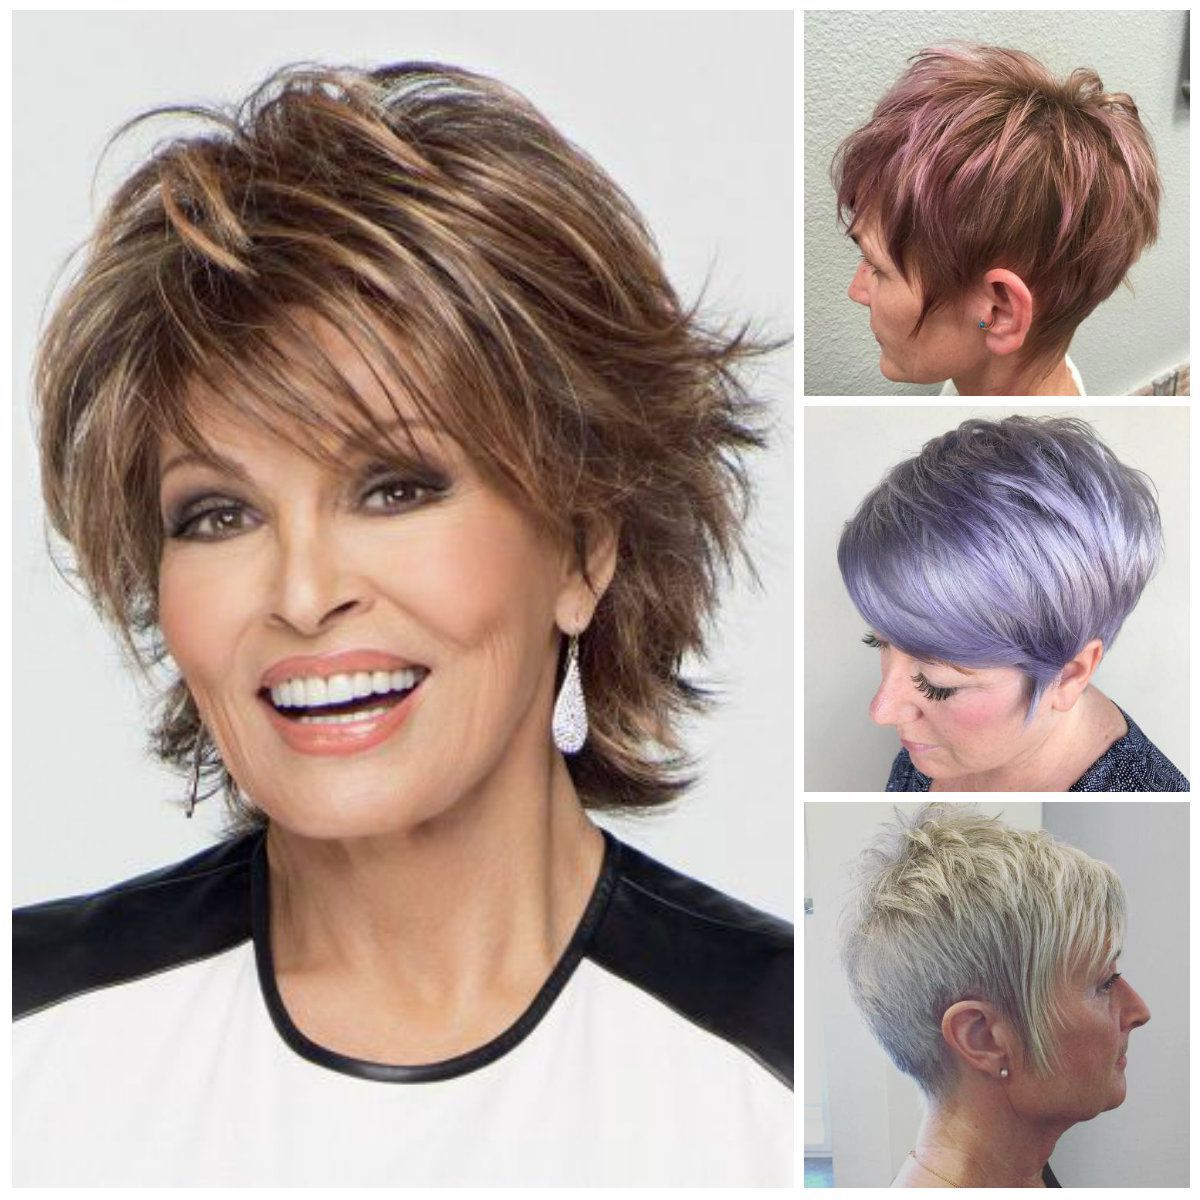 99 Short Hairstyles For Cocktail Party Unique 2017 Short Hairstyles Pertaining To Short Hairstyles For Cocktail Party (Photo 6 of 25)